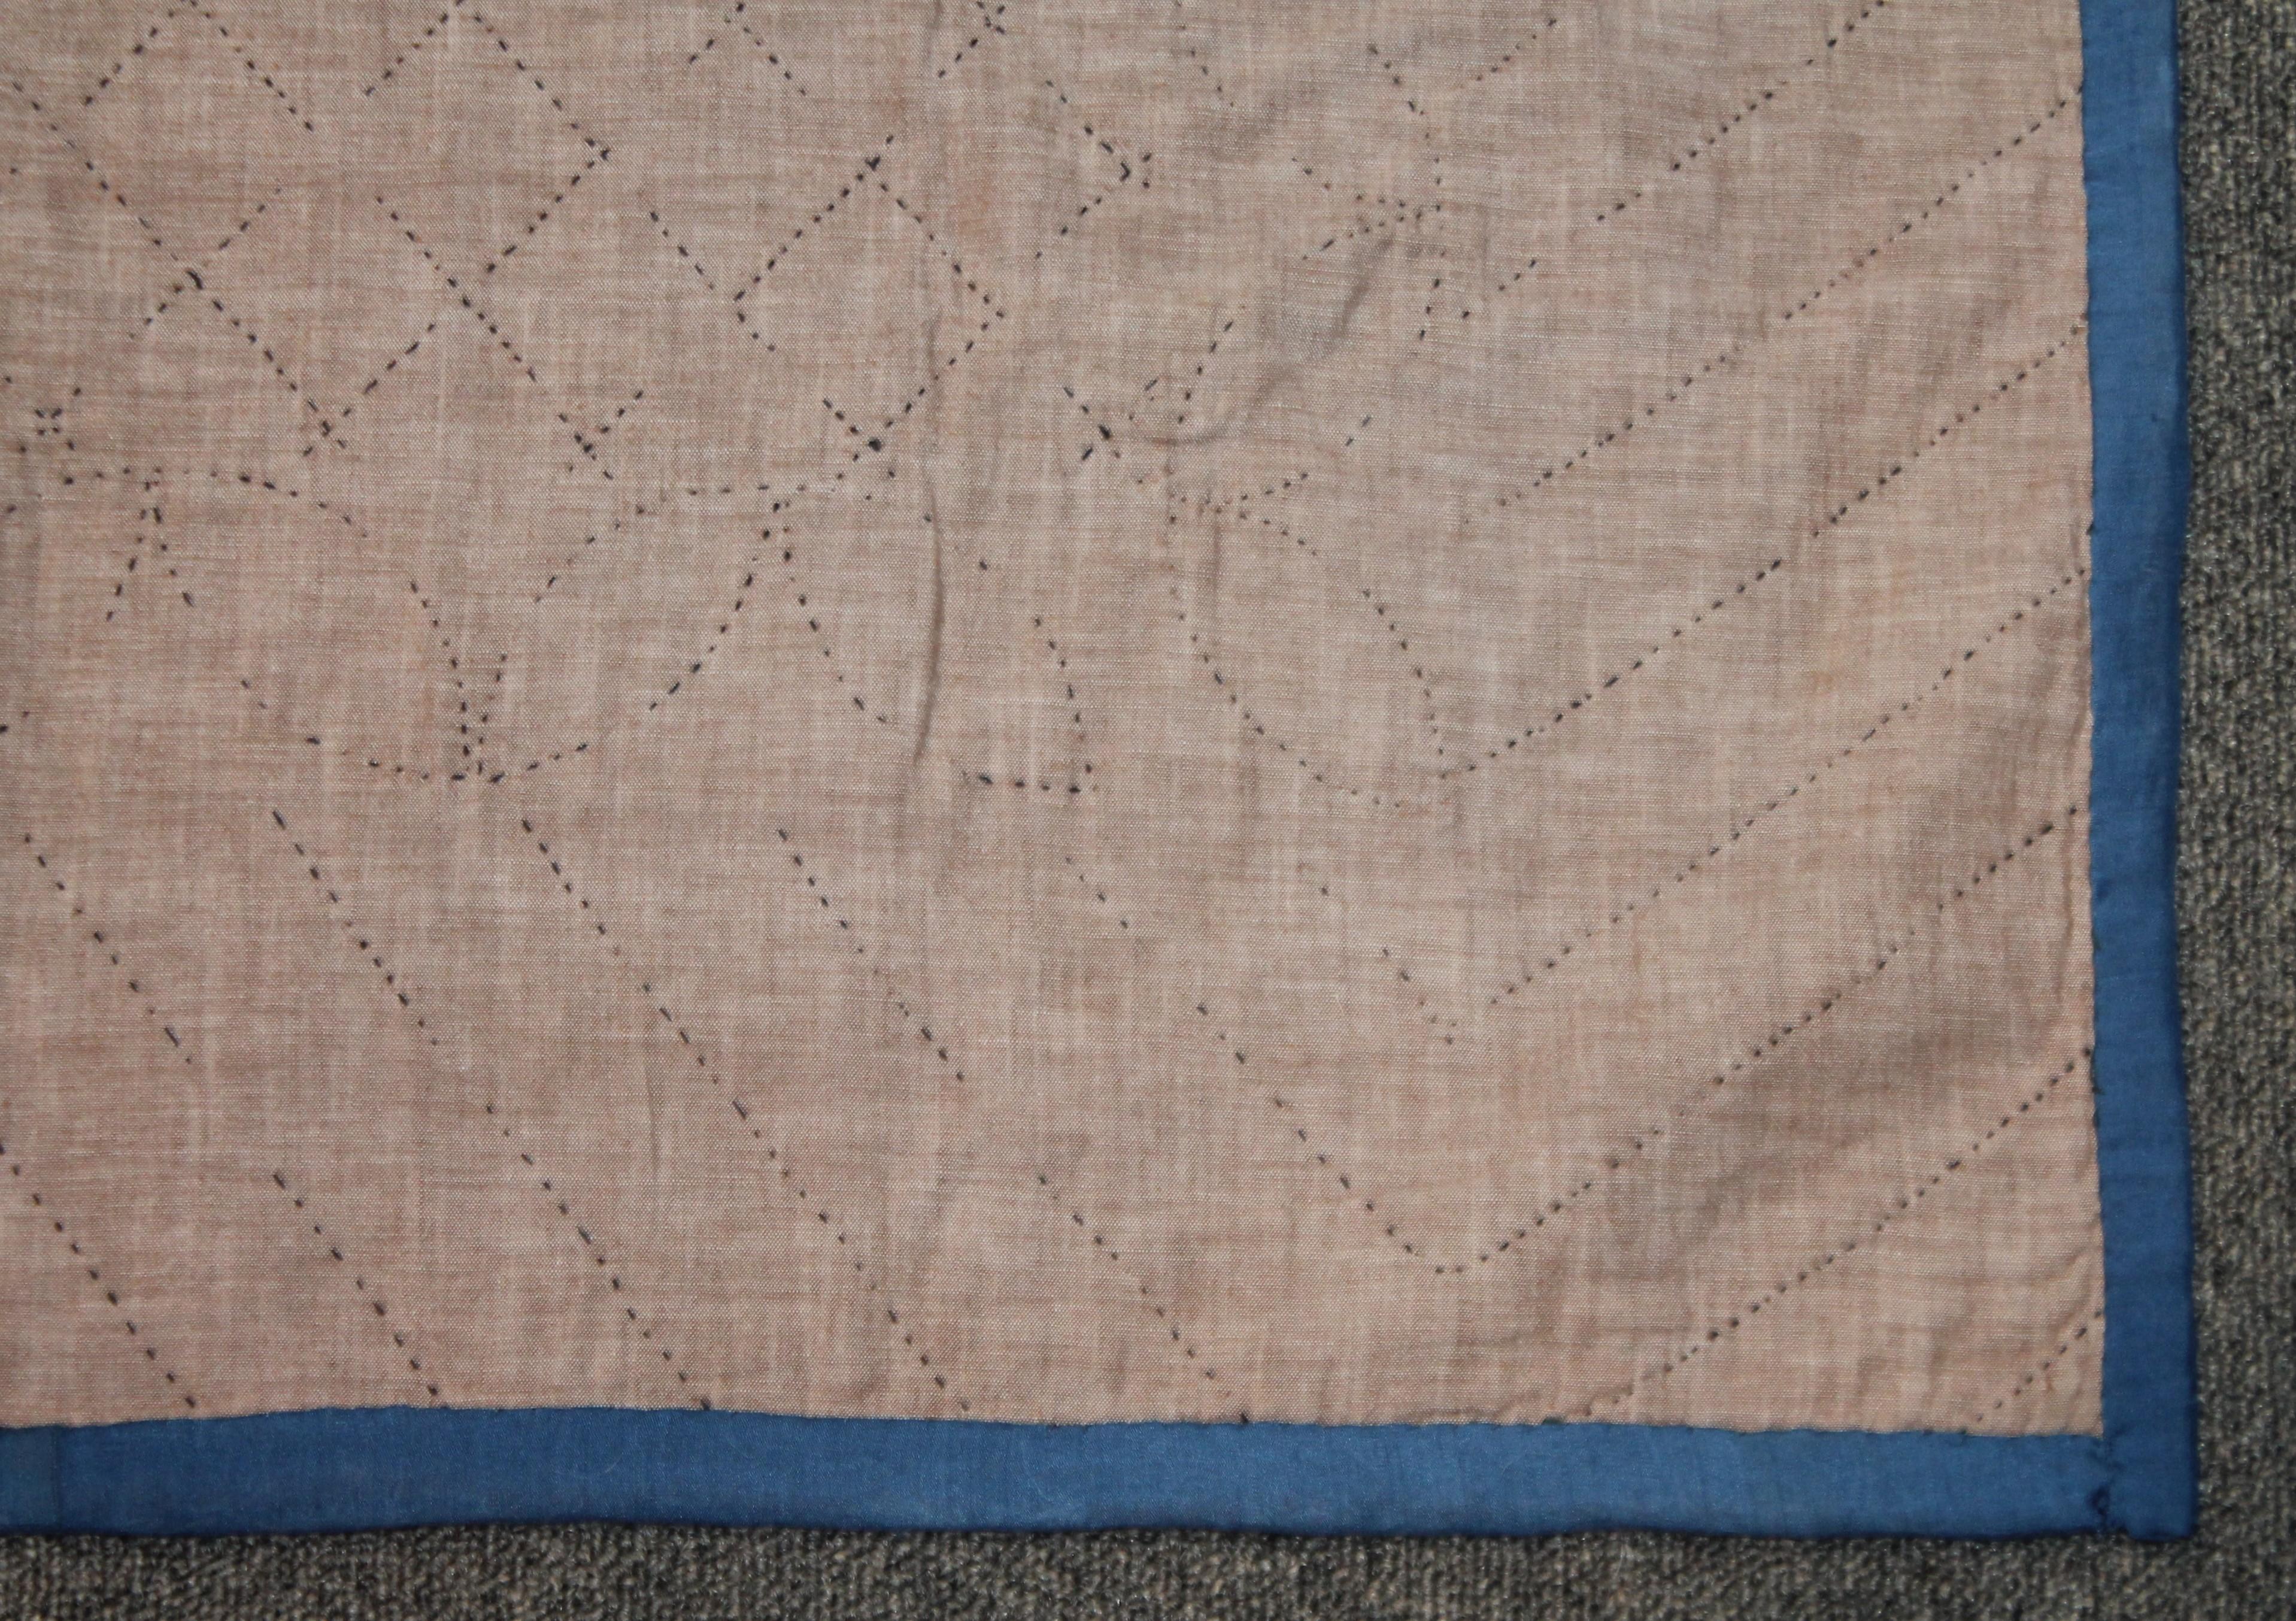 Hand-Crafted Rare Amish Square in a Square Crib Quilt For Sale